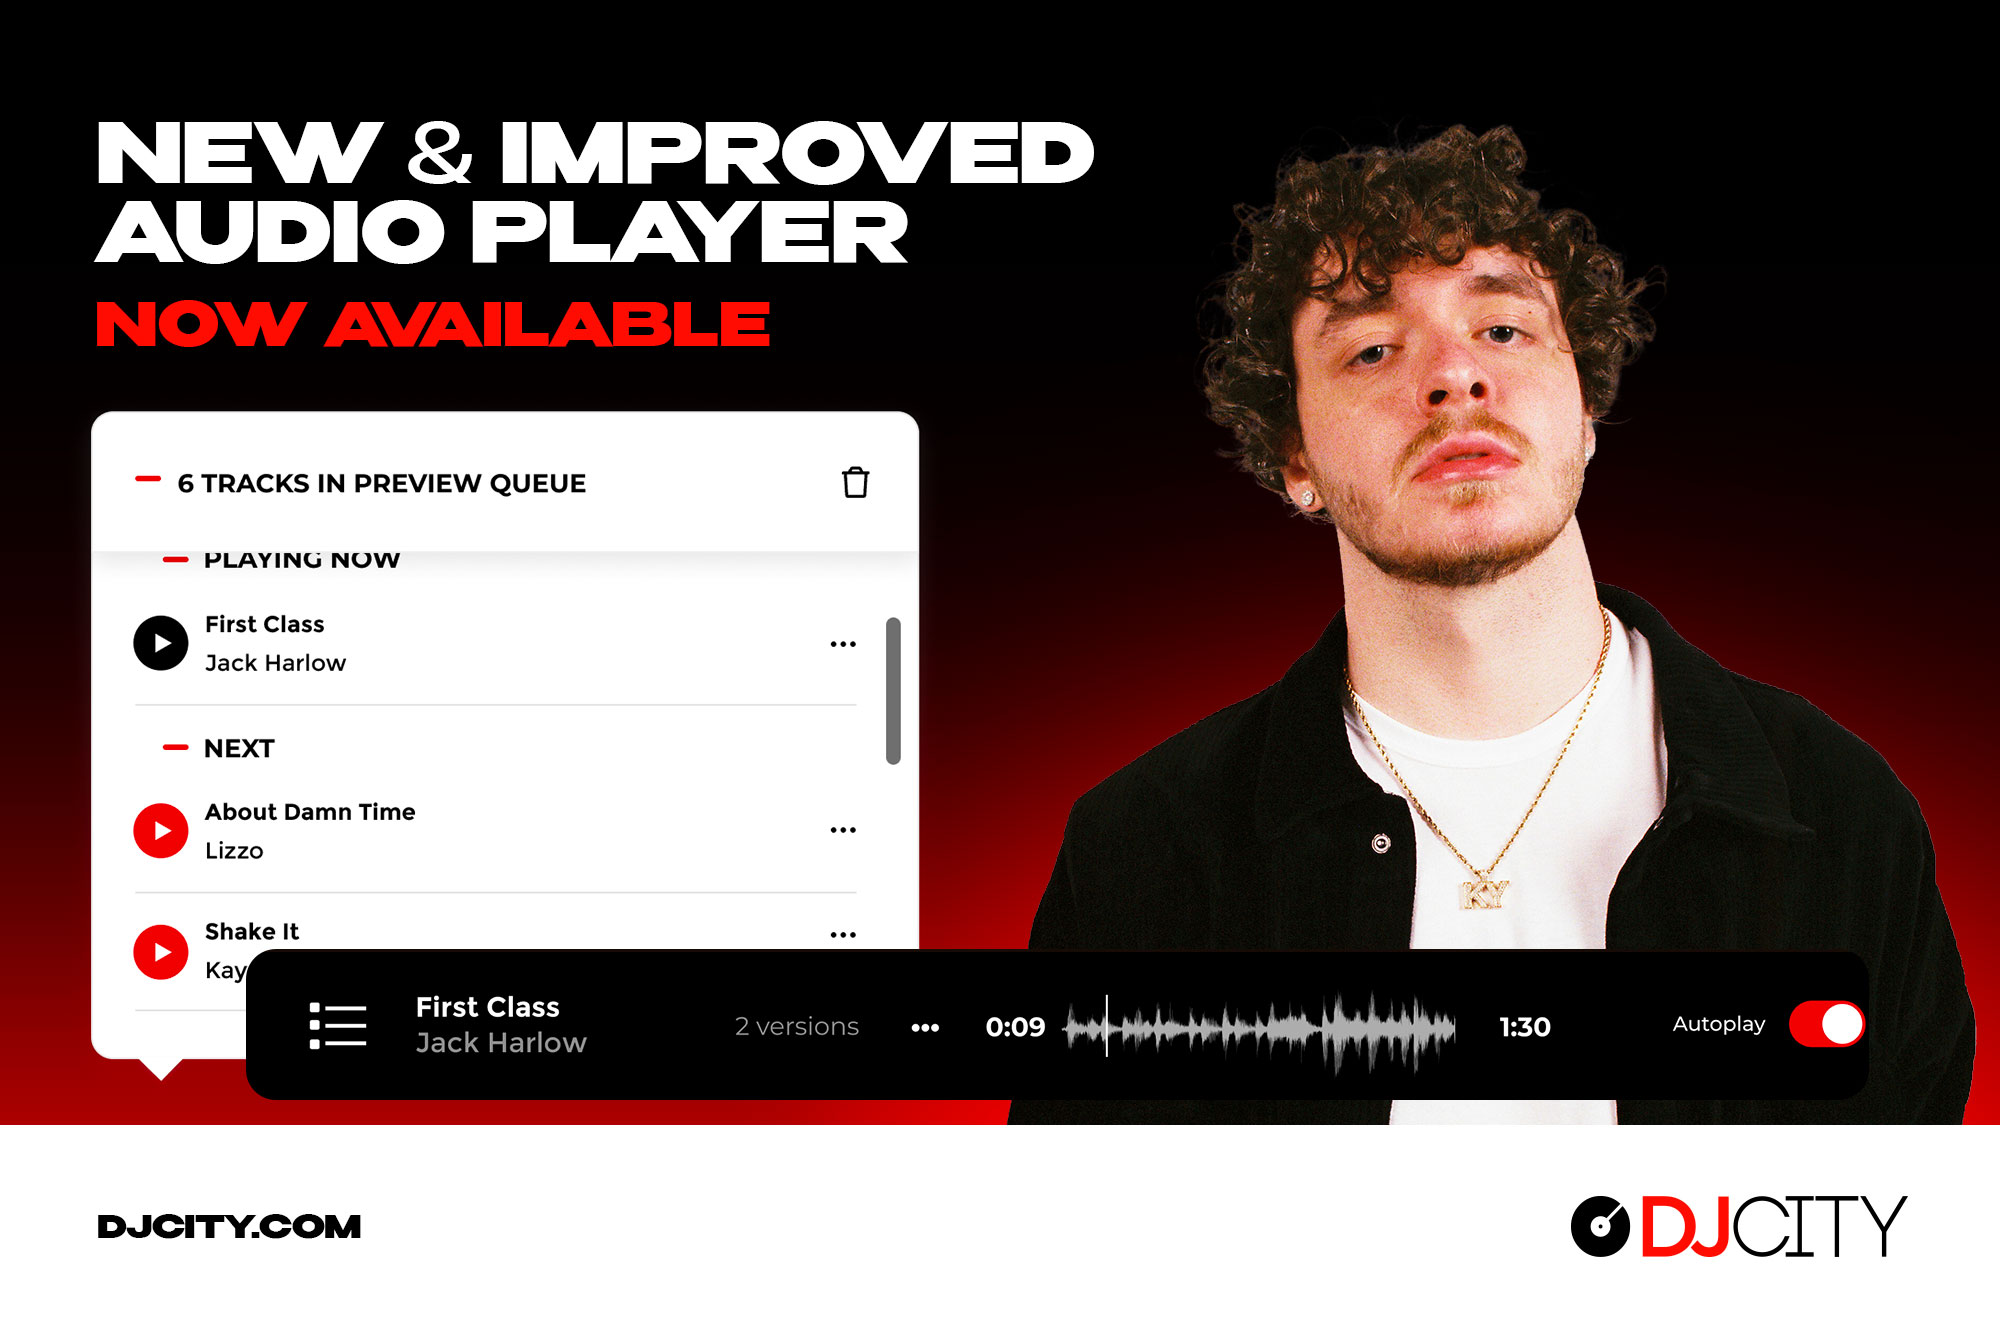 New Enhanced Audio Player Now Available on DJcity